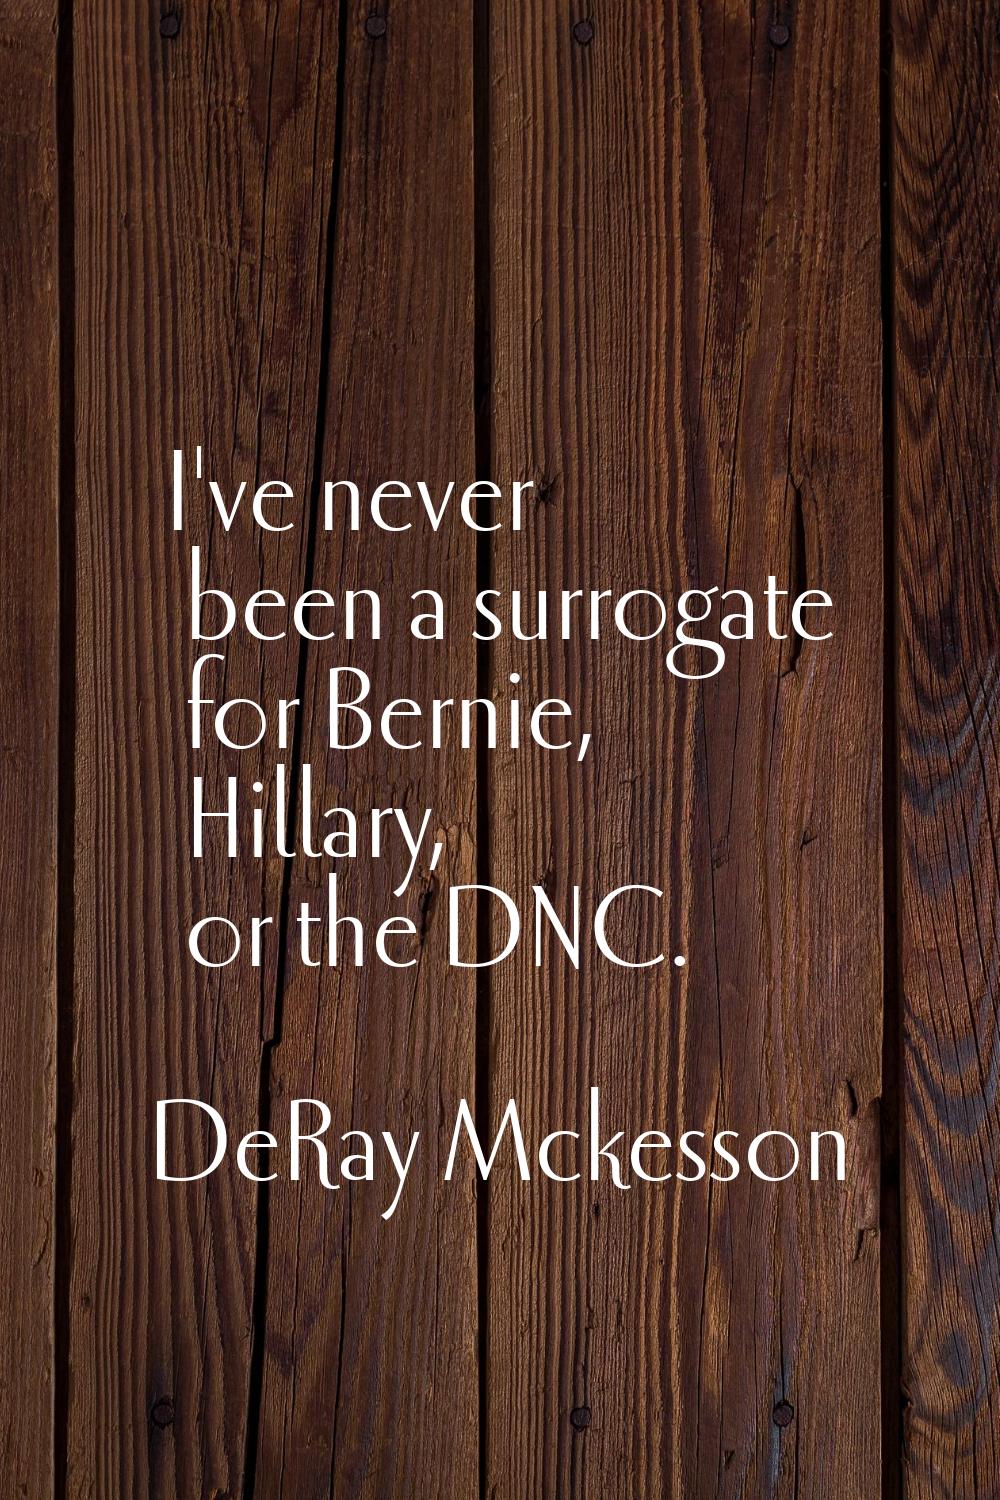 I've never been a surrogate for Bernie, Hillary, or the DNC.